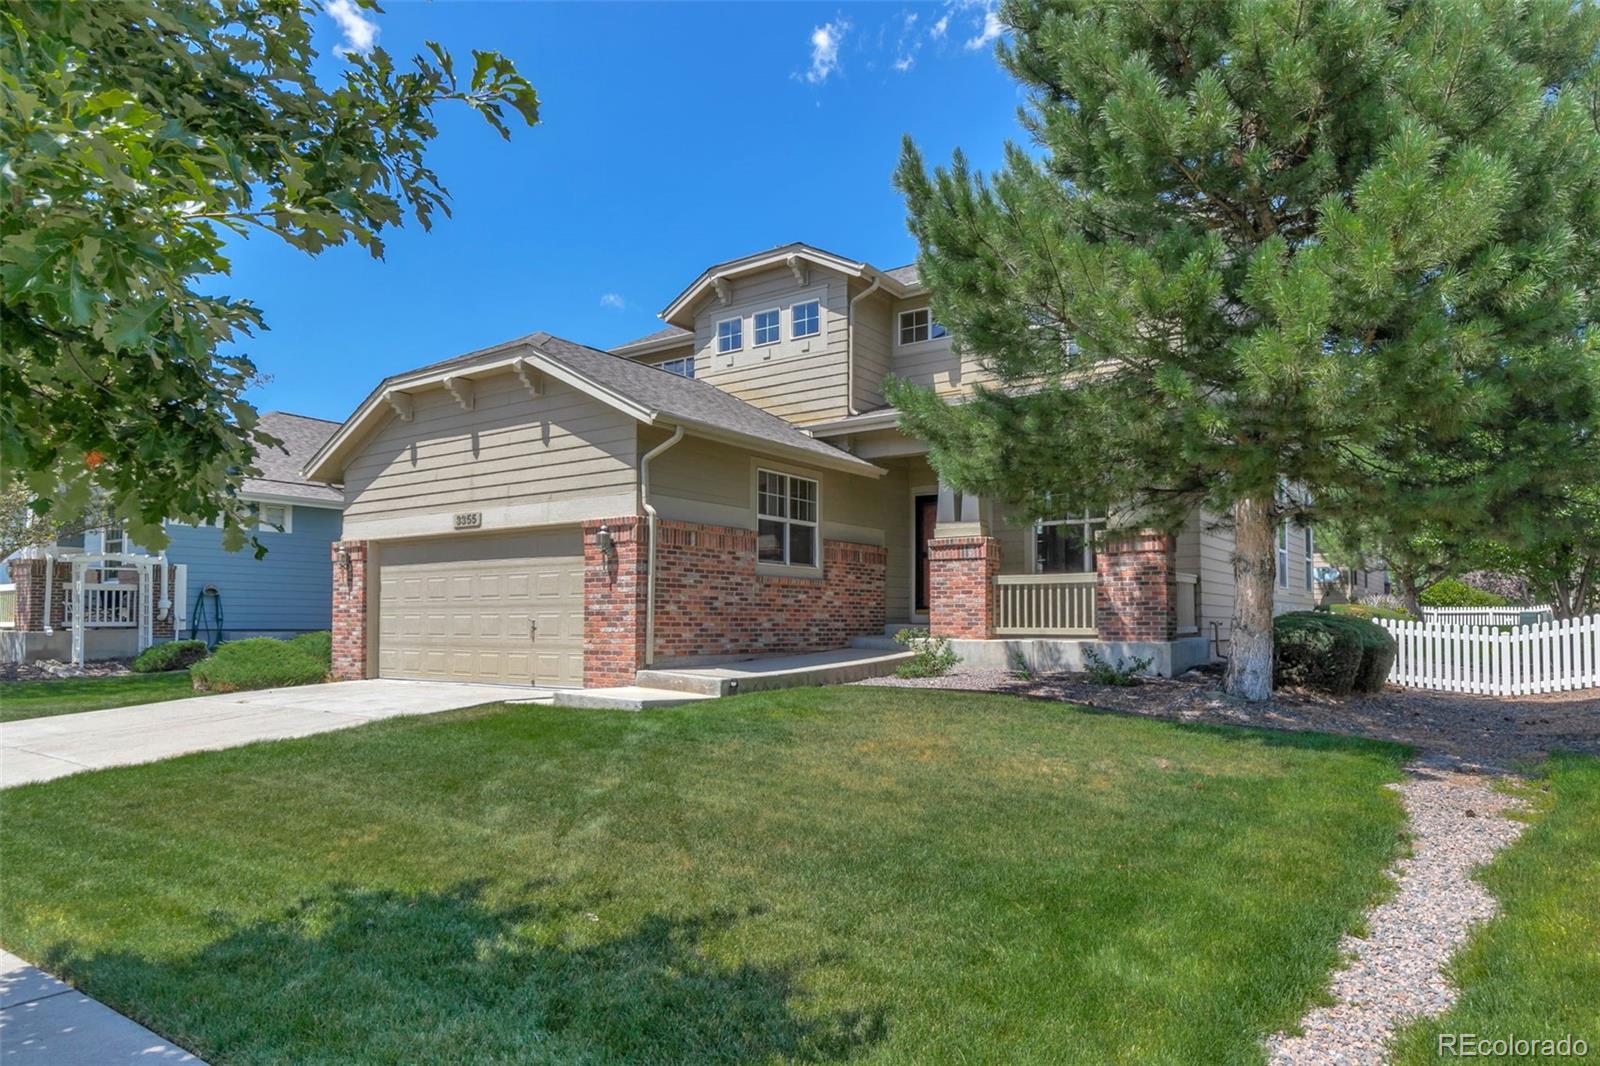 3355 w 126th place, broomfield sold home. Closed on 2024-01-30 for $567,000.